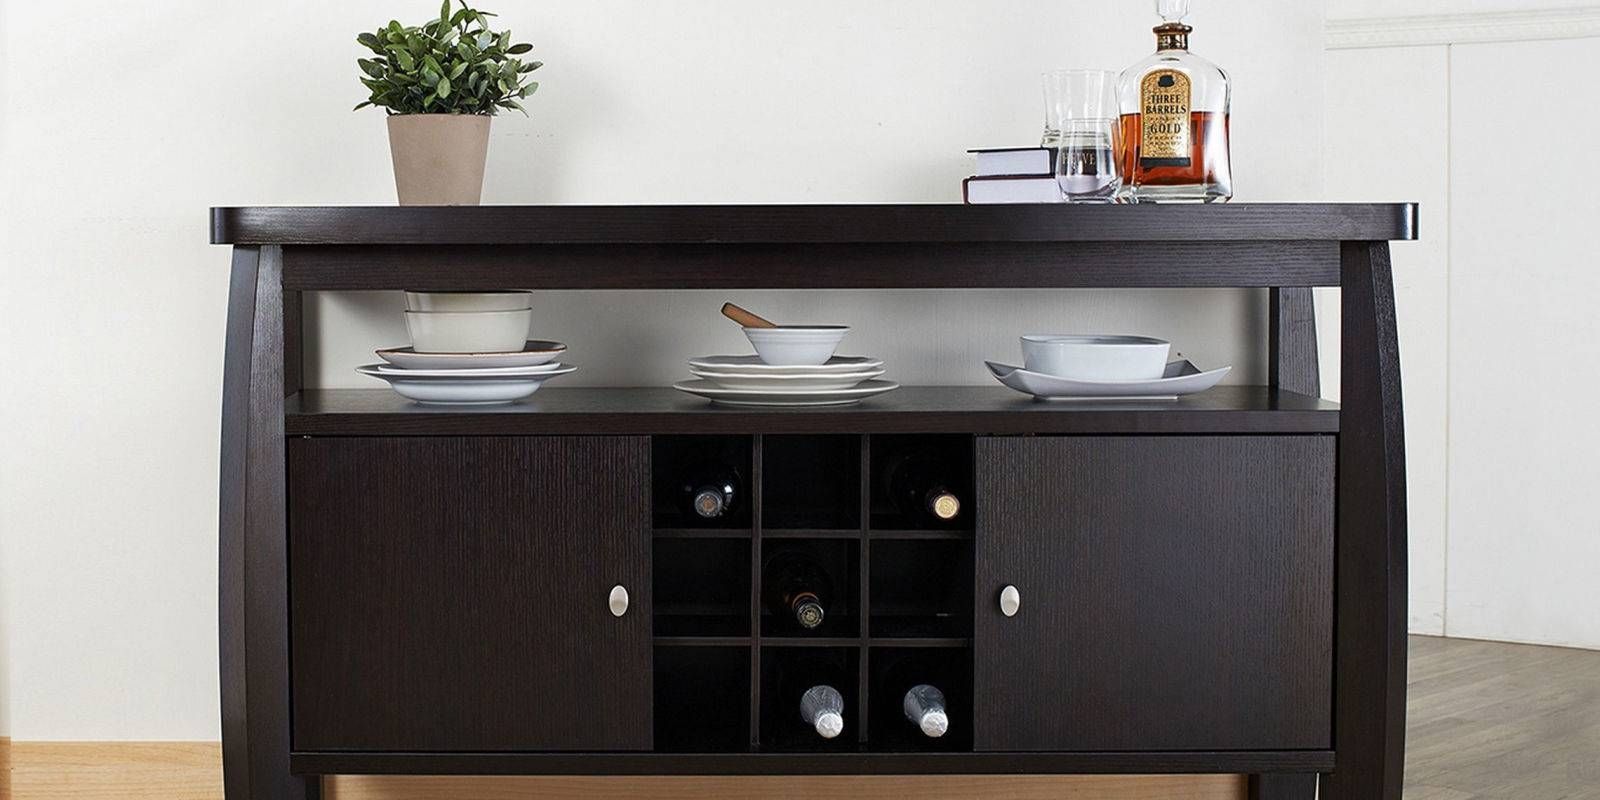 11 Best Sideboards And Buffets In 2018 – Reviews Of Sideboards Regarding Latest Espresso Sideboards (Photo 2 of 15)